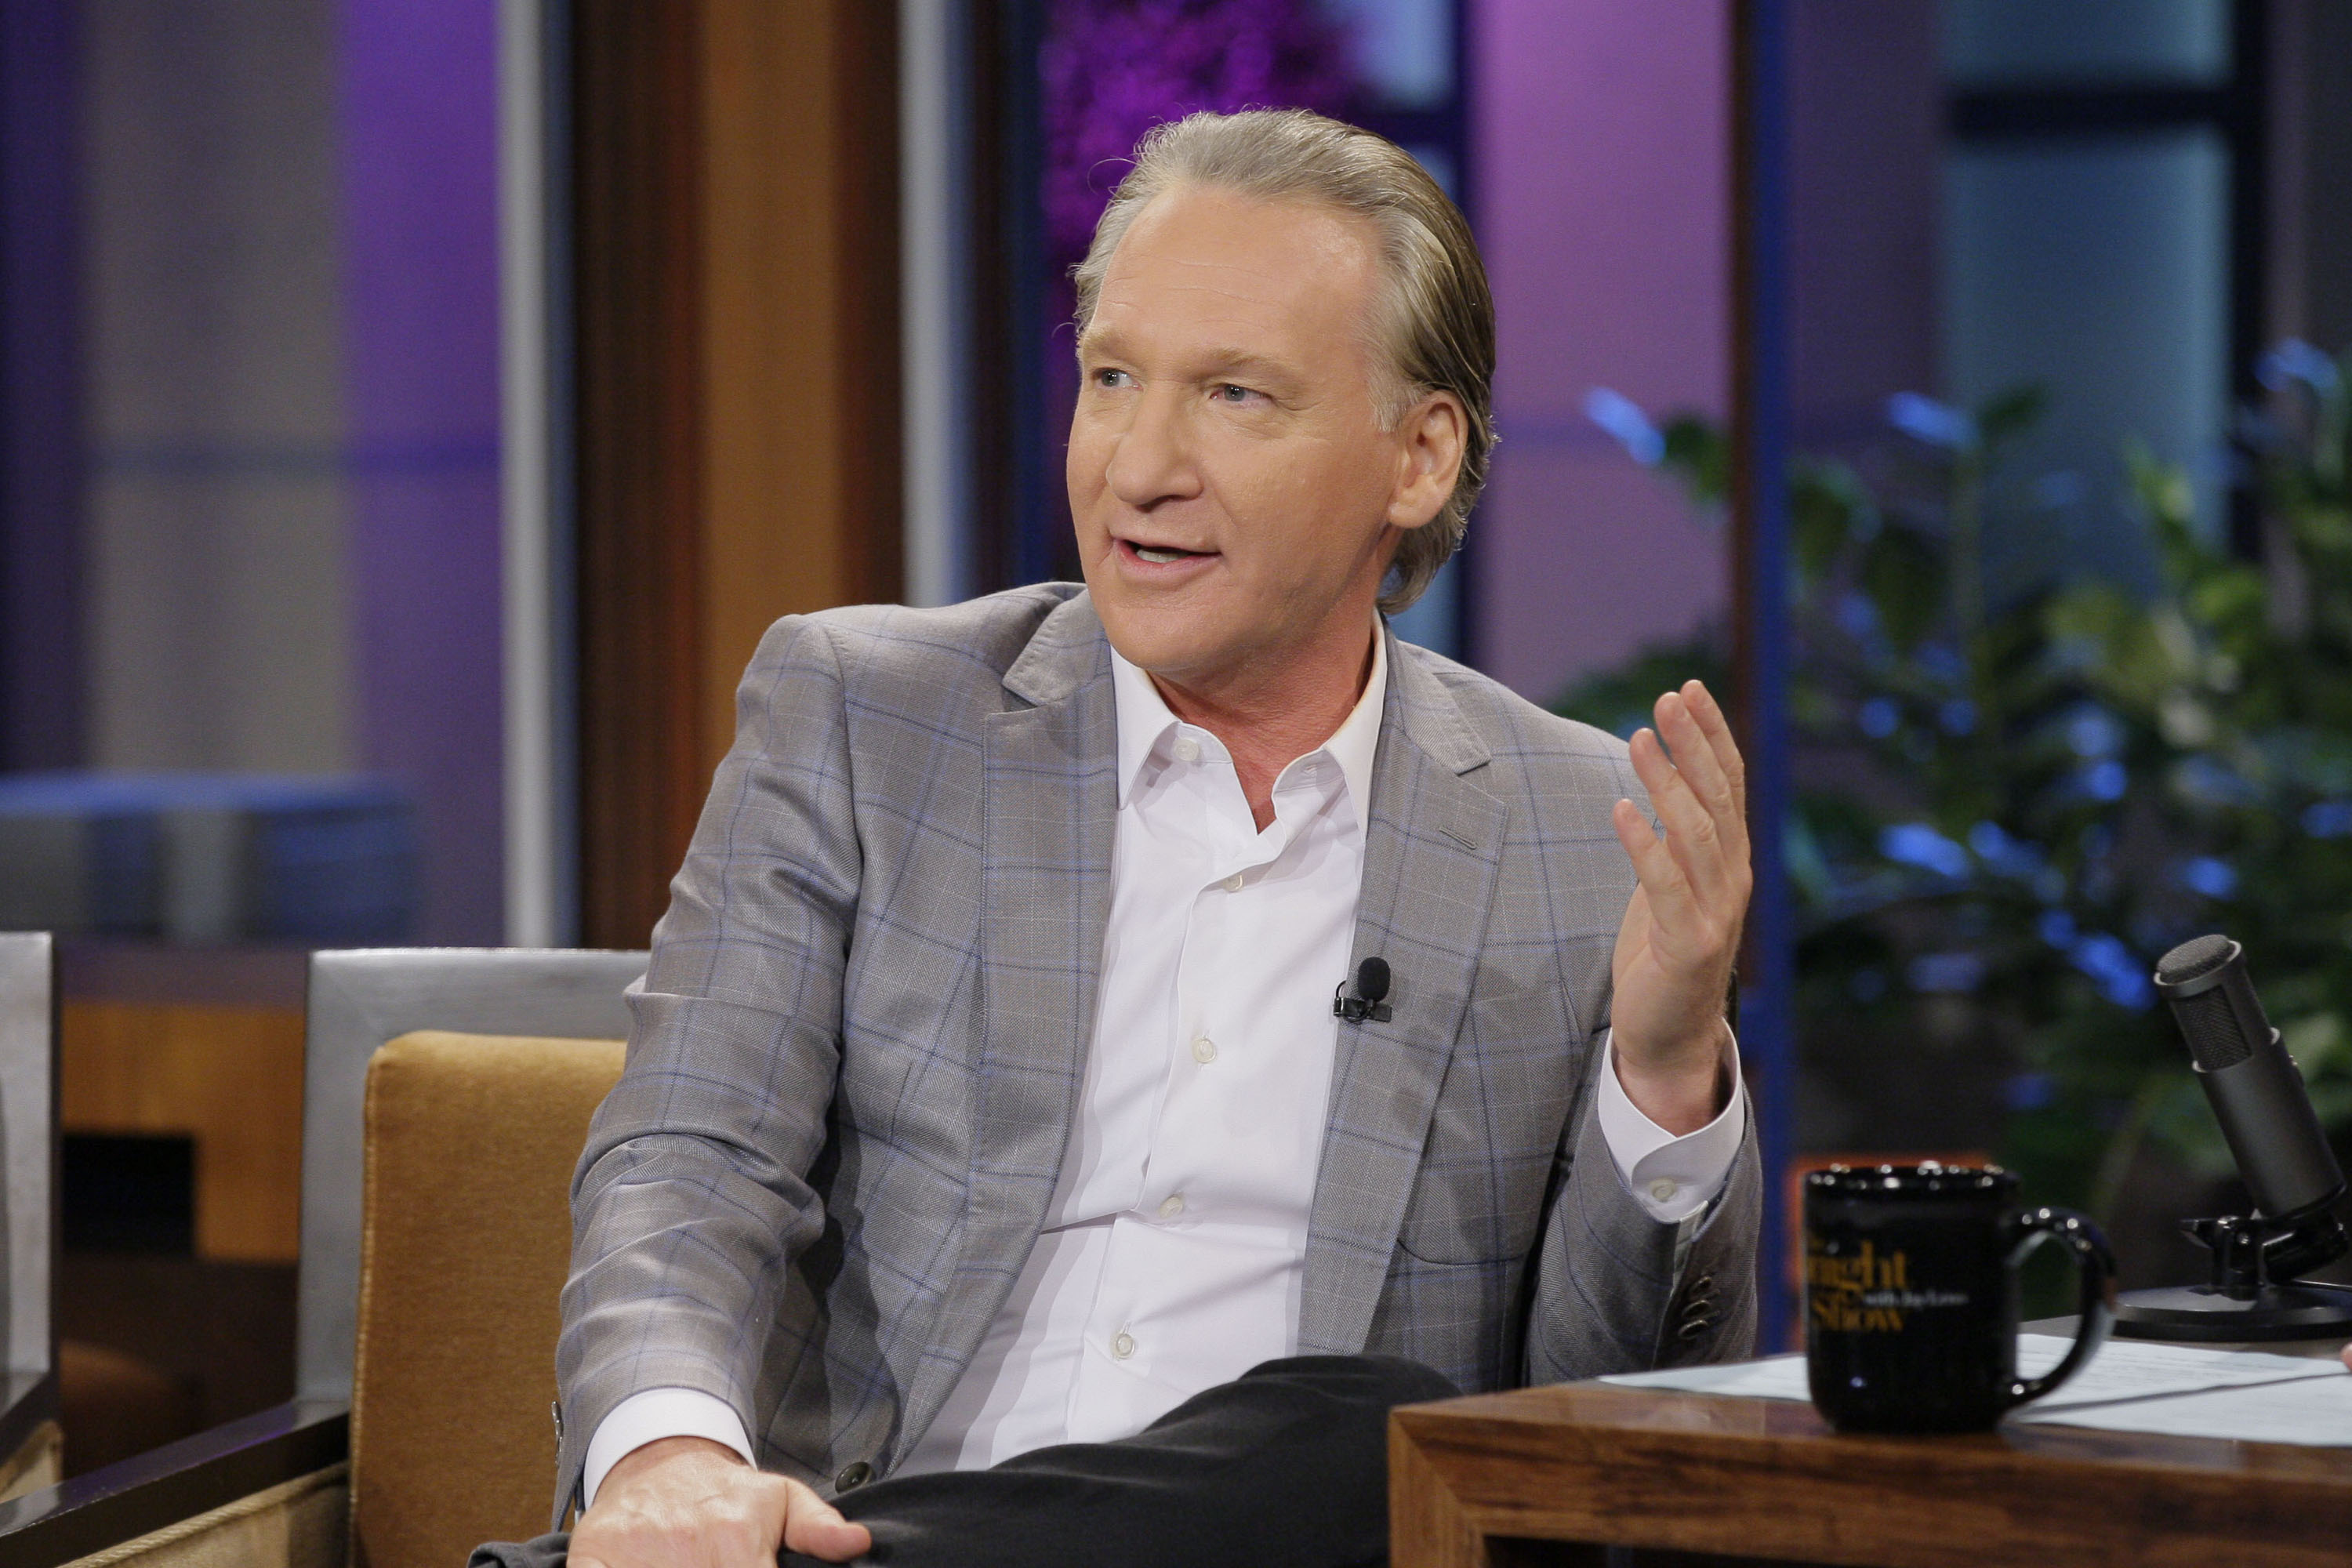 Comedian Bill Maher during an interview with Jay Leno on September 3, 2013. (NBC&mdash;NBCU Photo Bank via Getty Images)